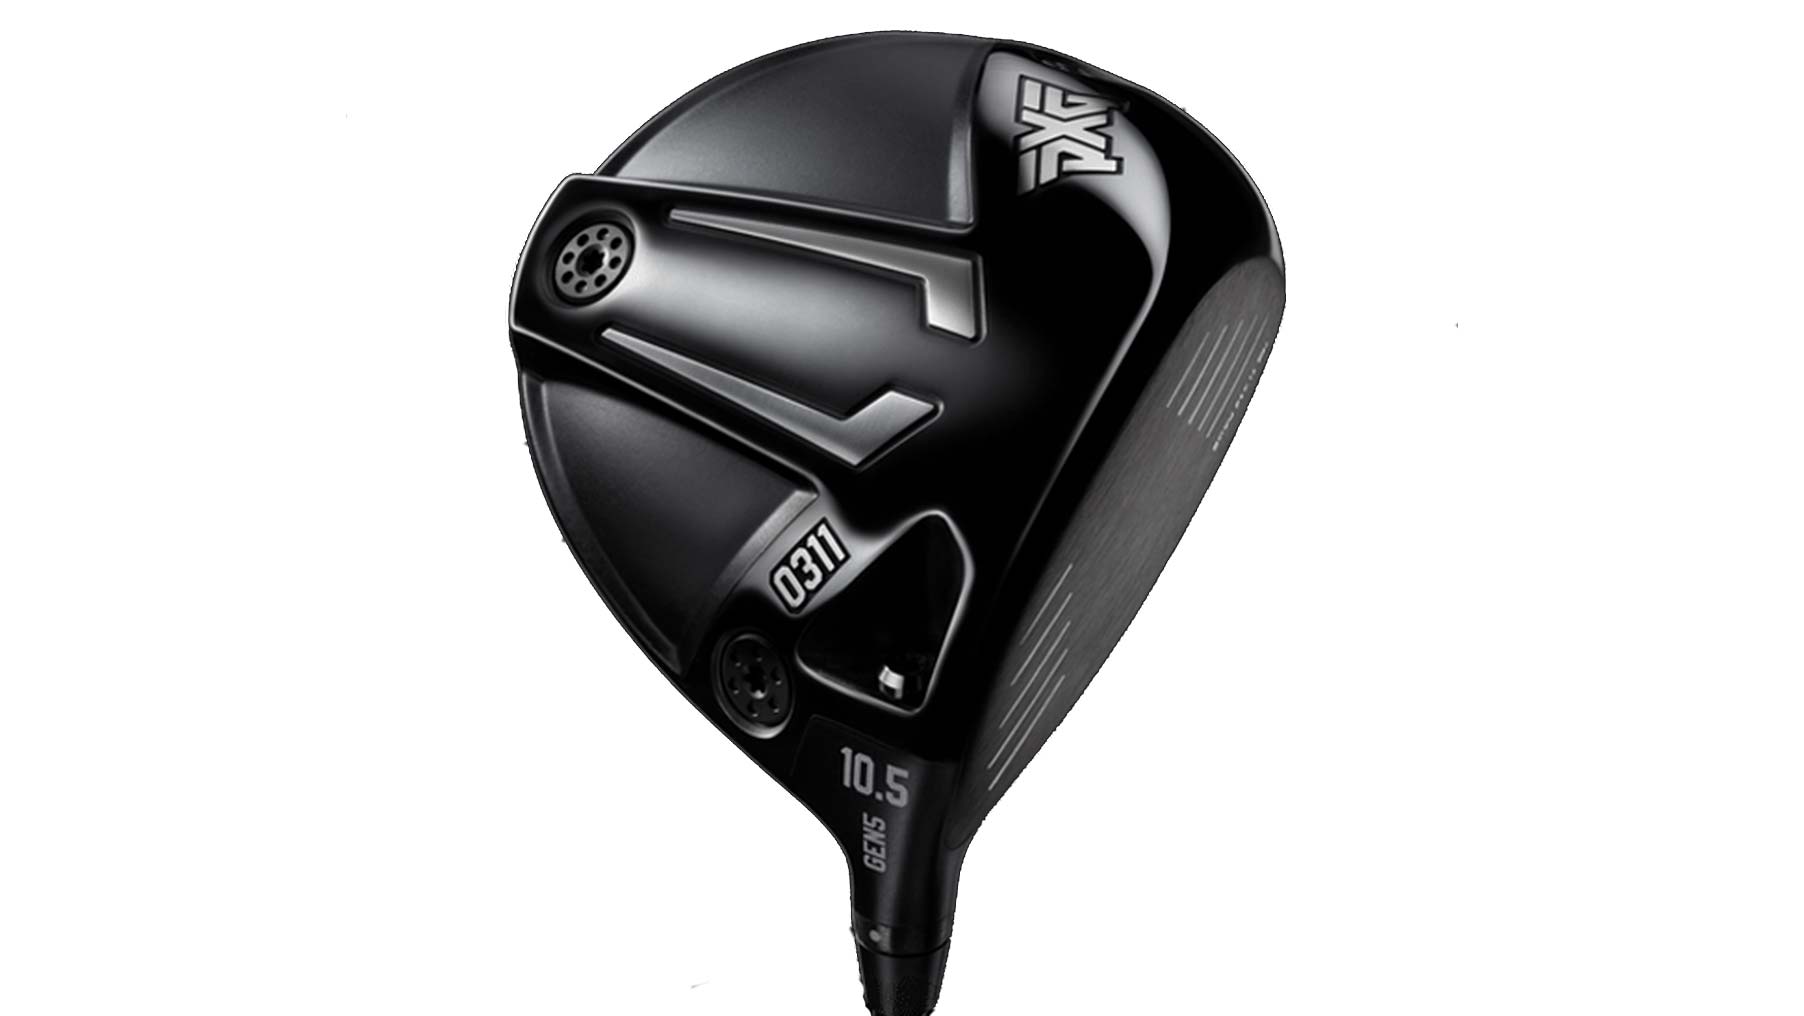 New PXG golf clubs for 2023 (drivers, irons, woods, hybrids